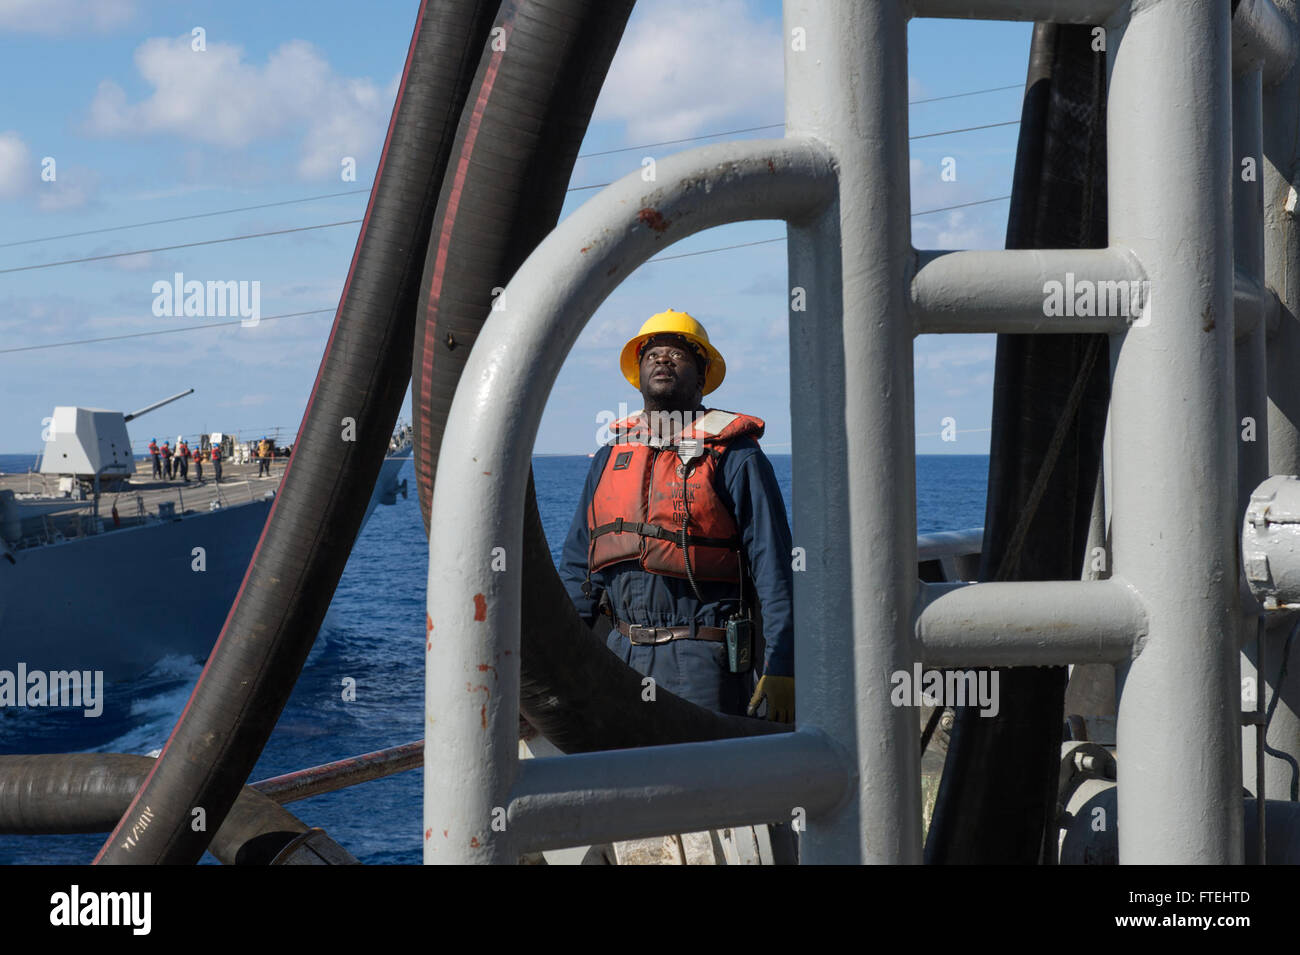 MEDITERRANEAN SEA (Oct. 28, 2014) - A civil service mariner works on the weather deck the fleet replenishment oiler USNS Leroy Grumman (T-AO 195) during an underway replenishment-at-sea with the Arleigh-Burke Class Destroyer USS Truxtun (DDG 103). Grumman, the Military Sealift Command Mediterranean Sea duty oiler, is forward-deployed to the U.S. 6th Fleet area of operations in support of national security interests in Europe and Africa. Stock Photo